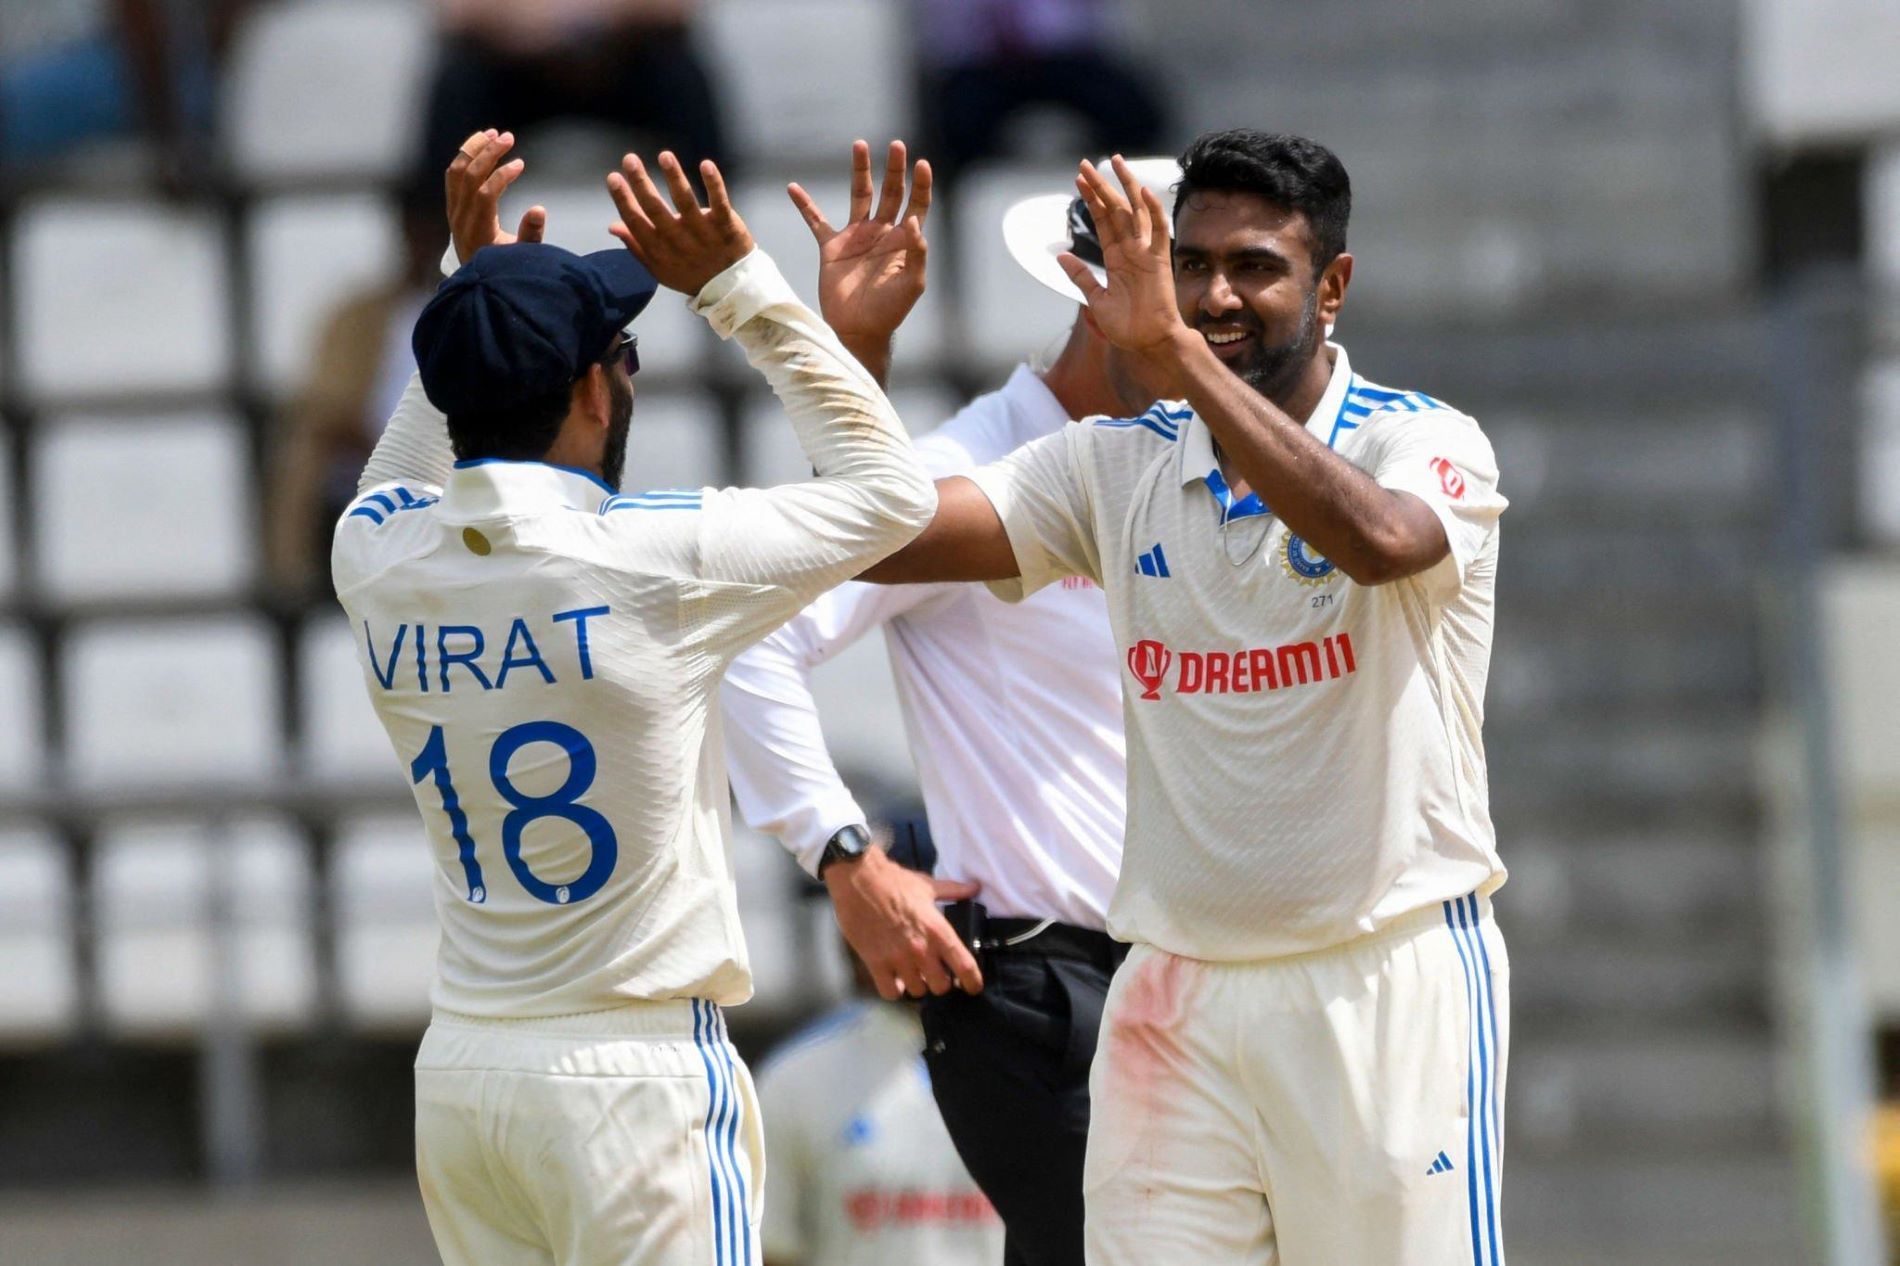 Ravichandran Ashwin lit up Day 1 of the first Test against West Indies